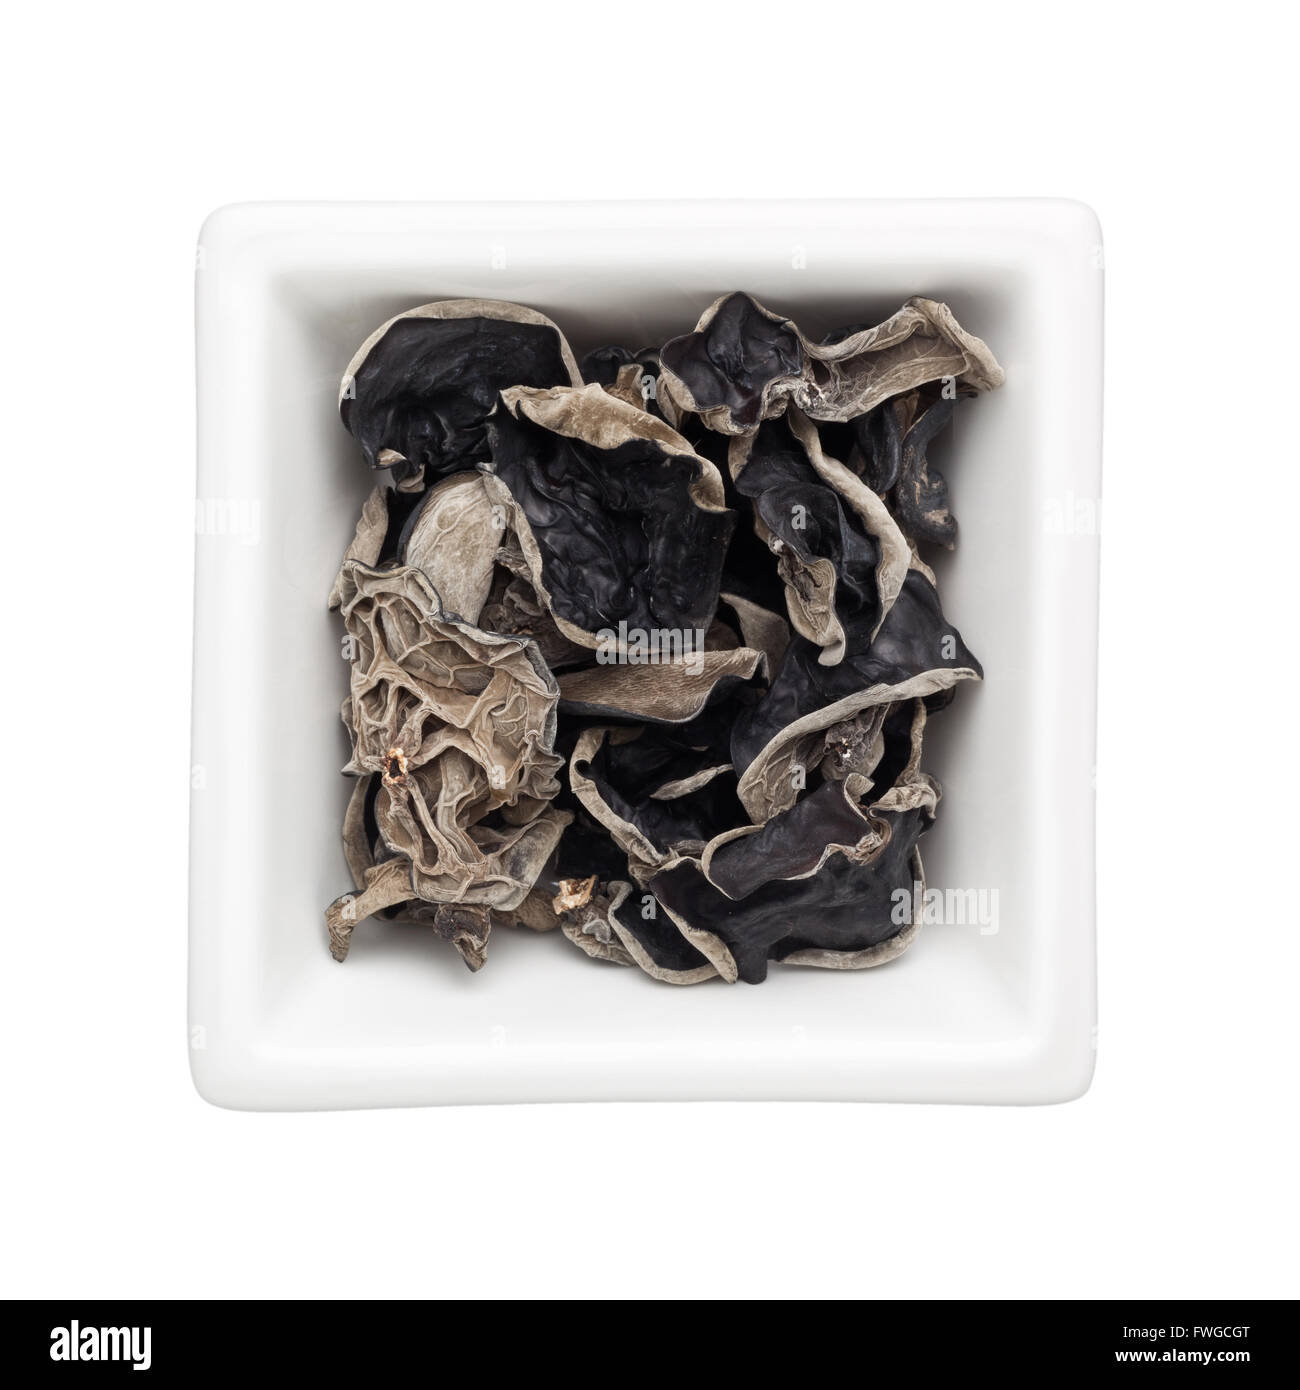 Dried black fungus in a square bowl isolated on white background Stock Photo